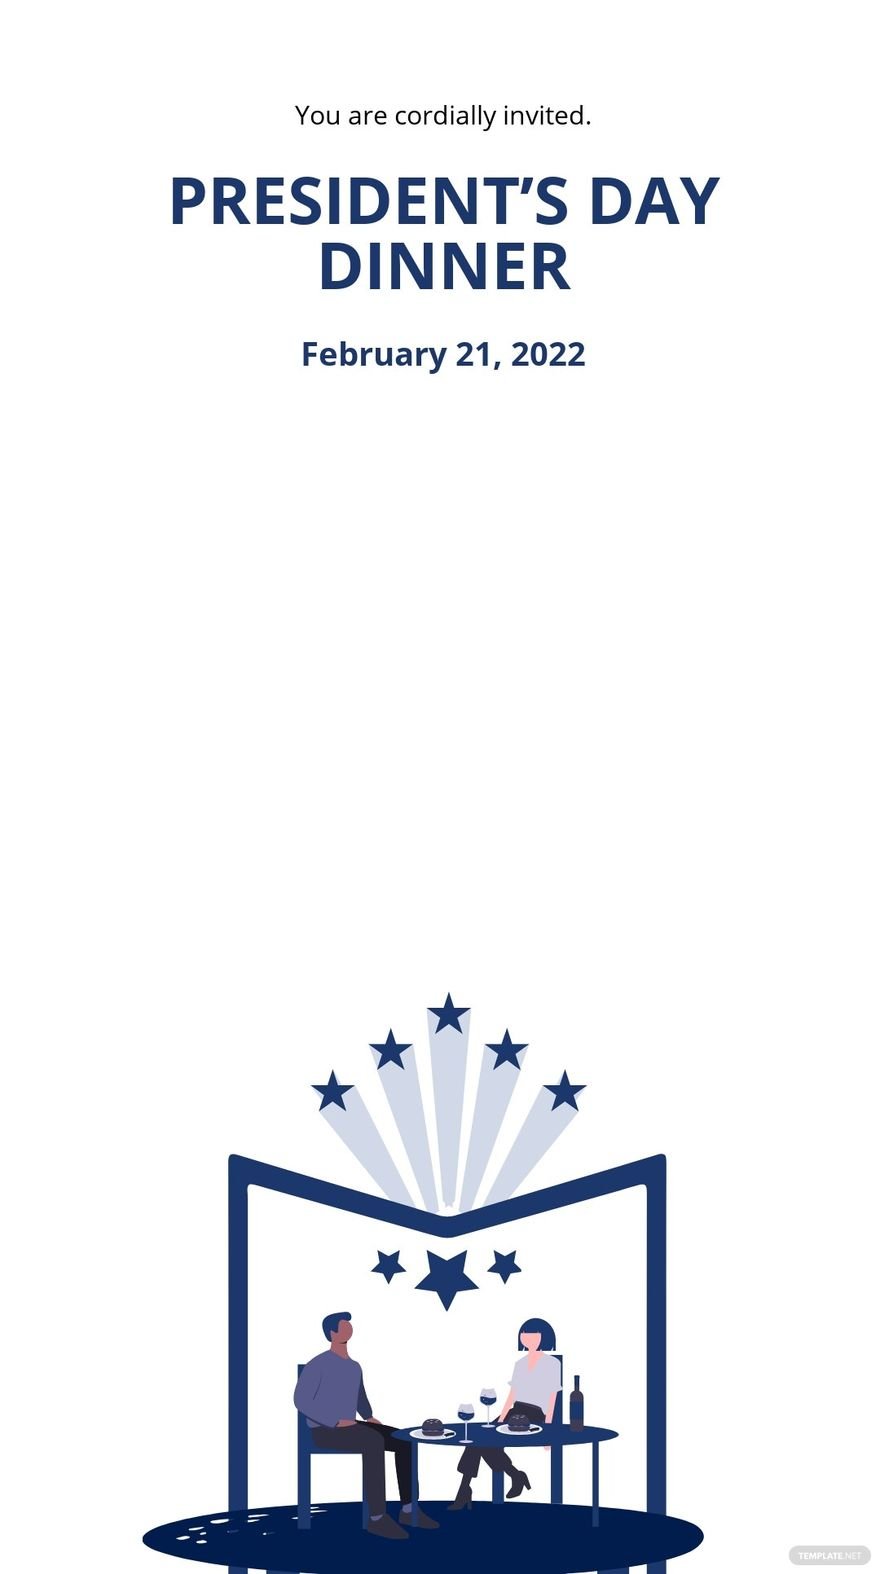 Free Presidents Day Invitation Snapchat Geofilter Template